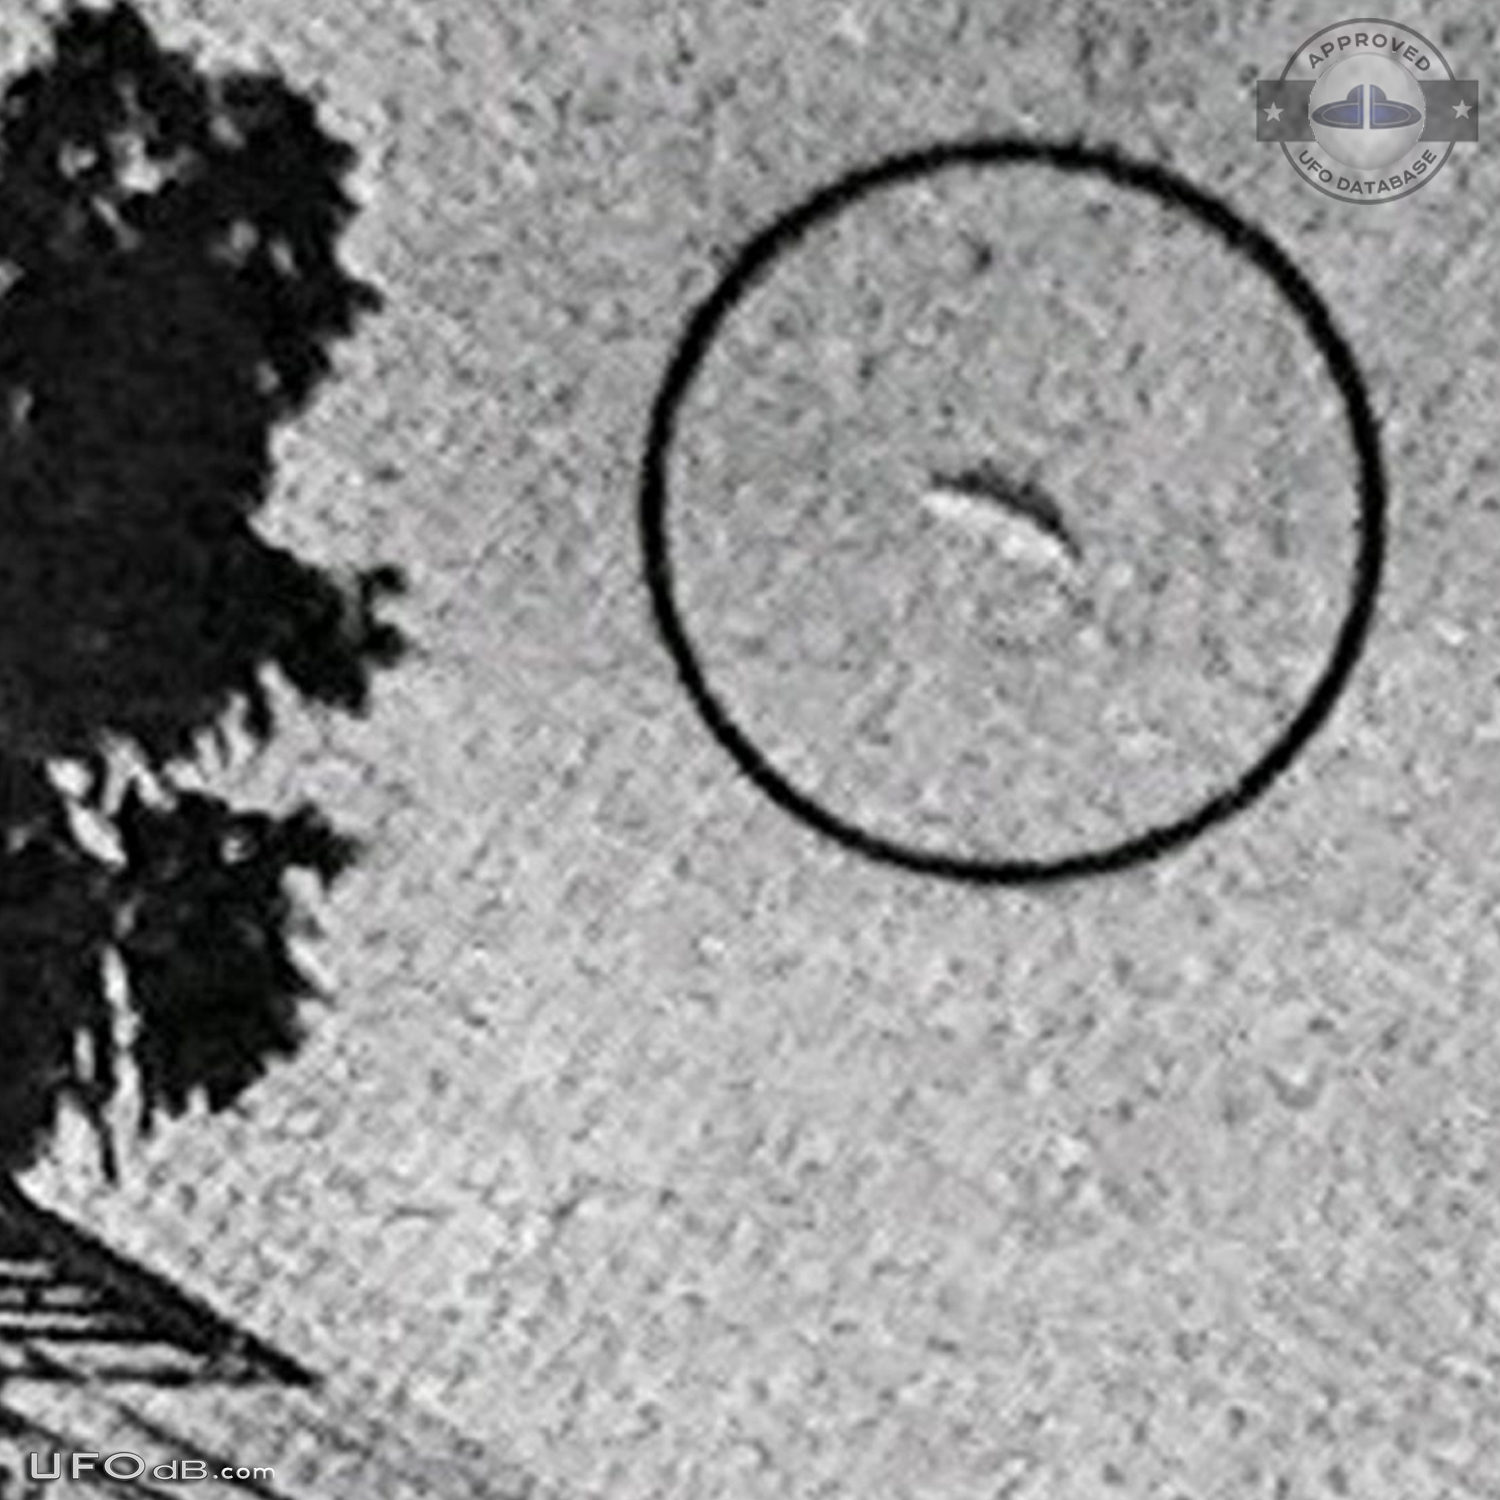 Very Old UFO Picture showing Saucer over Germiston South Africa 1916 UFO Picture #632-3